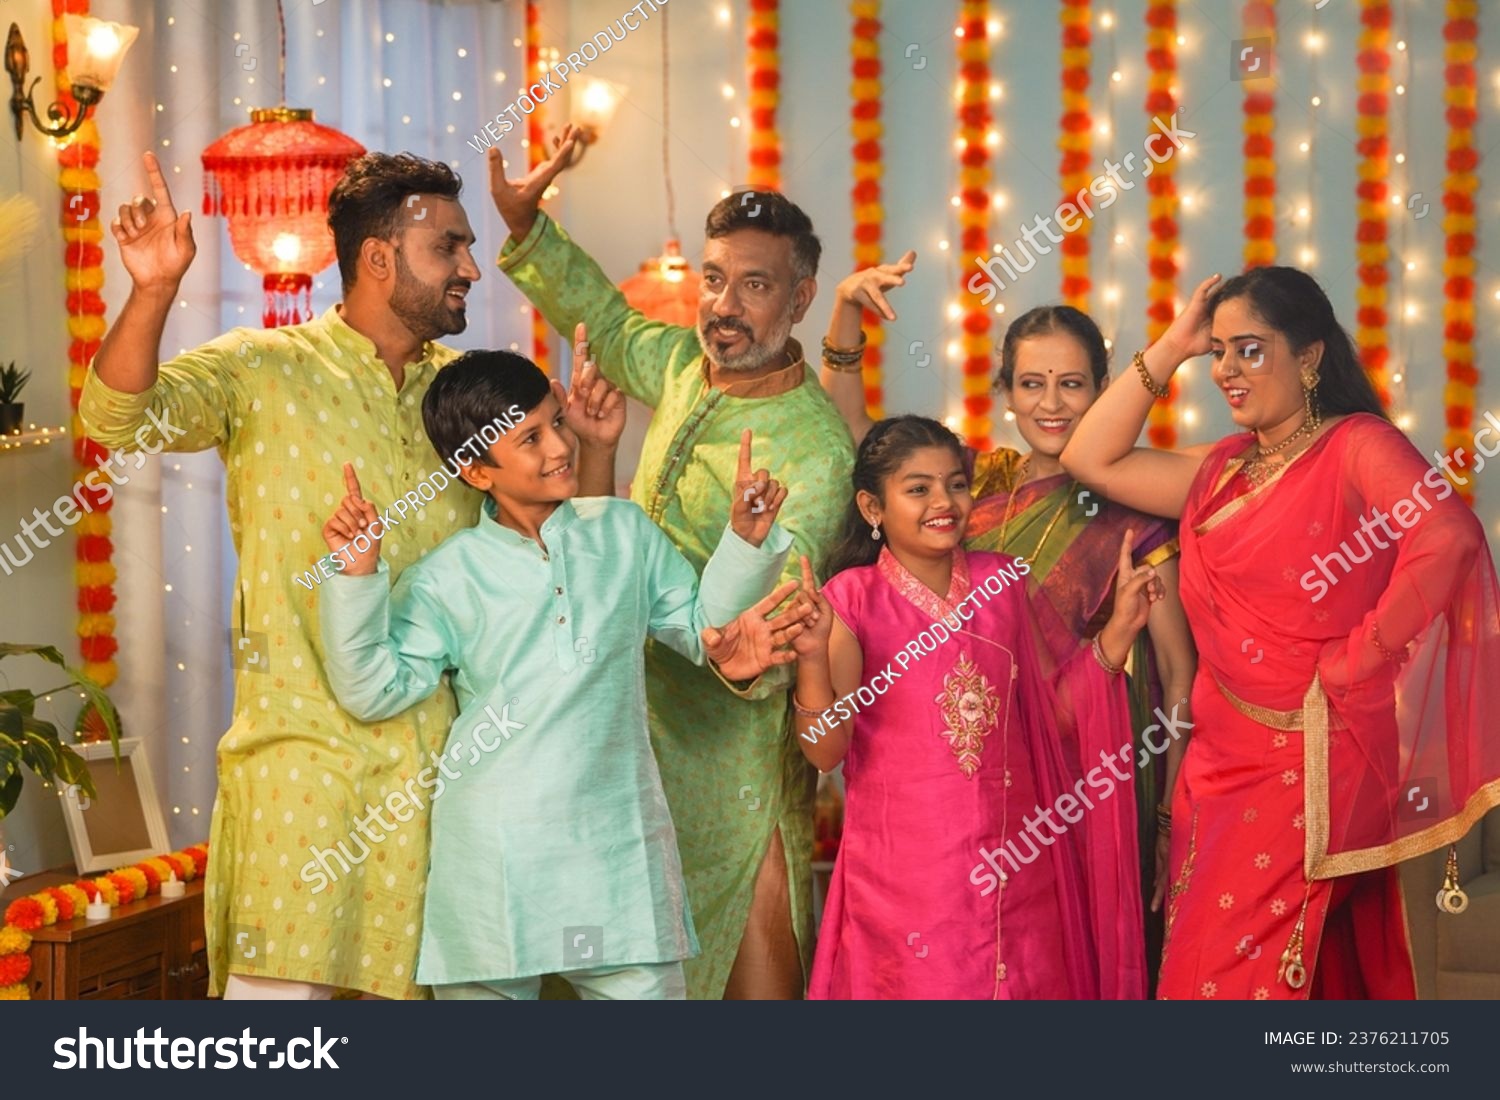 Group of family members dancing together during diwali festive celebration gathering at home - concept of entertainment, Holiday reunion and enjoyment #2376211705